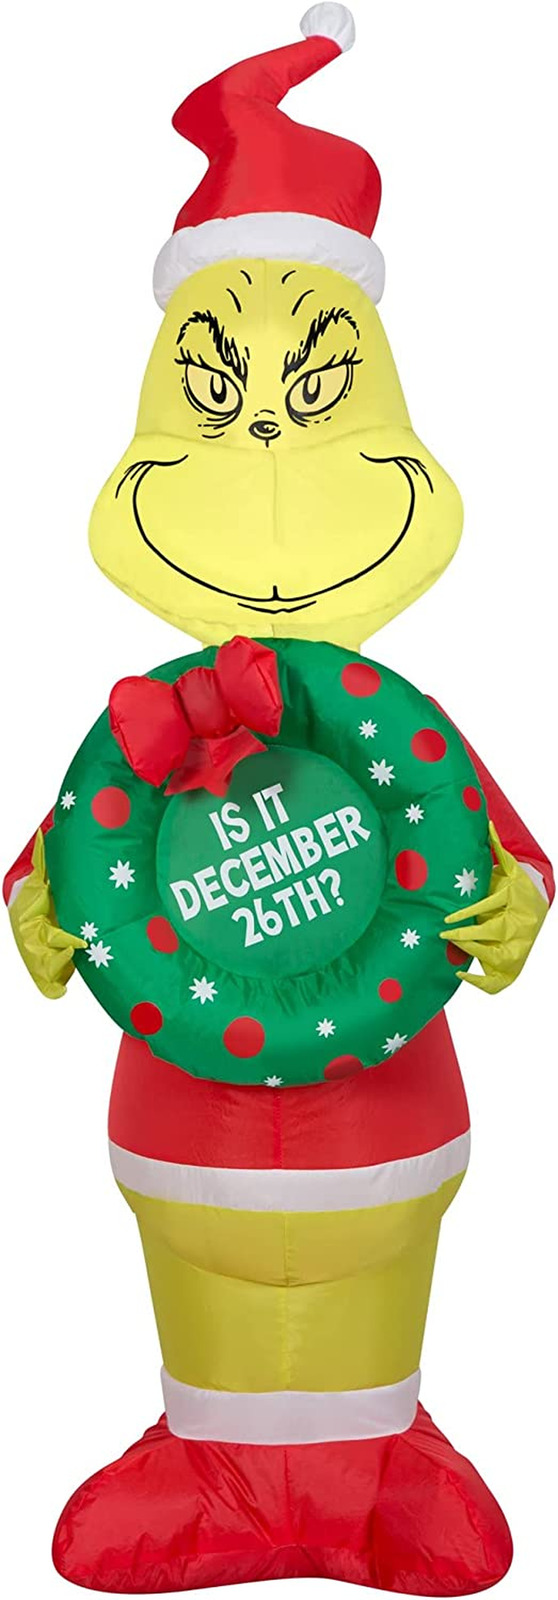 Christmas Airblown Inflatable Inflatable Grinch with Wreath, 4 Ft Tall, Yellow